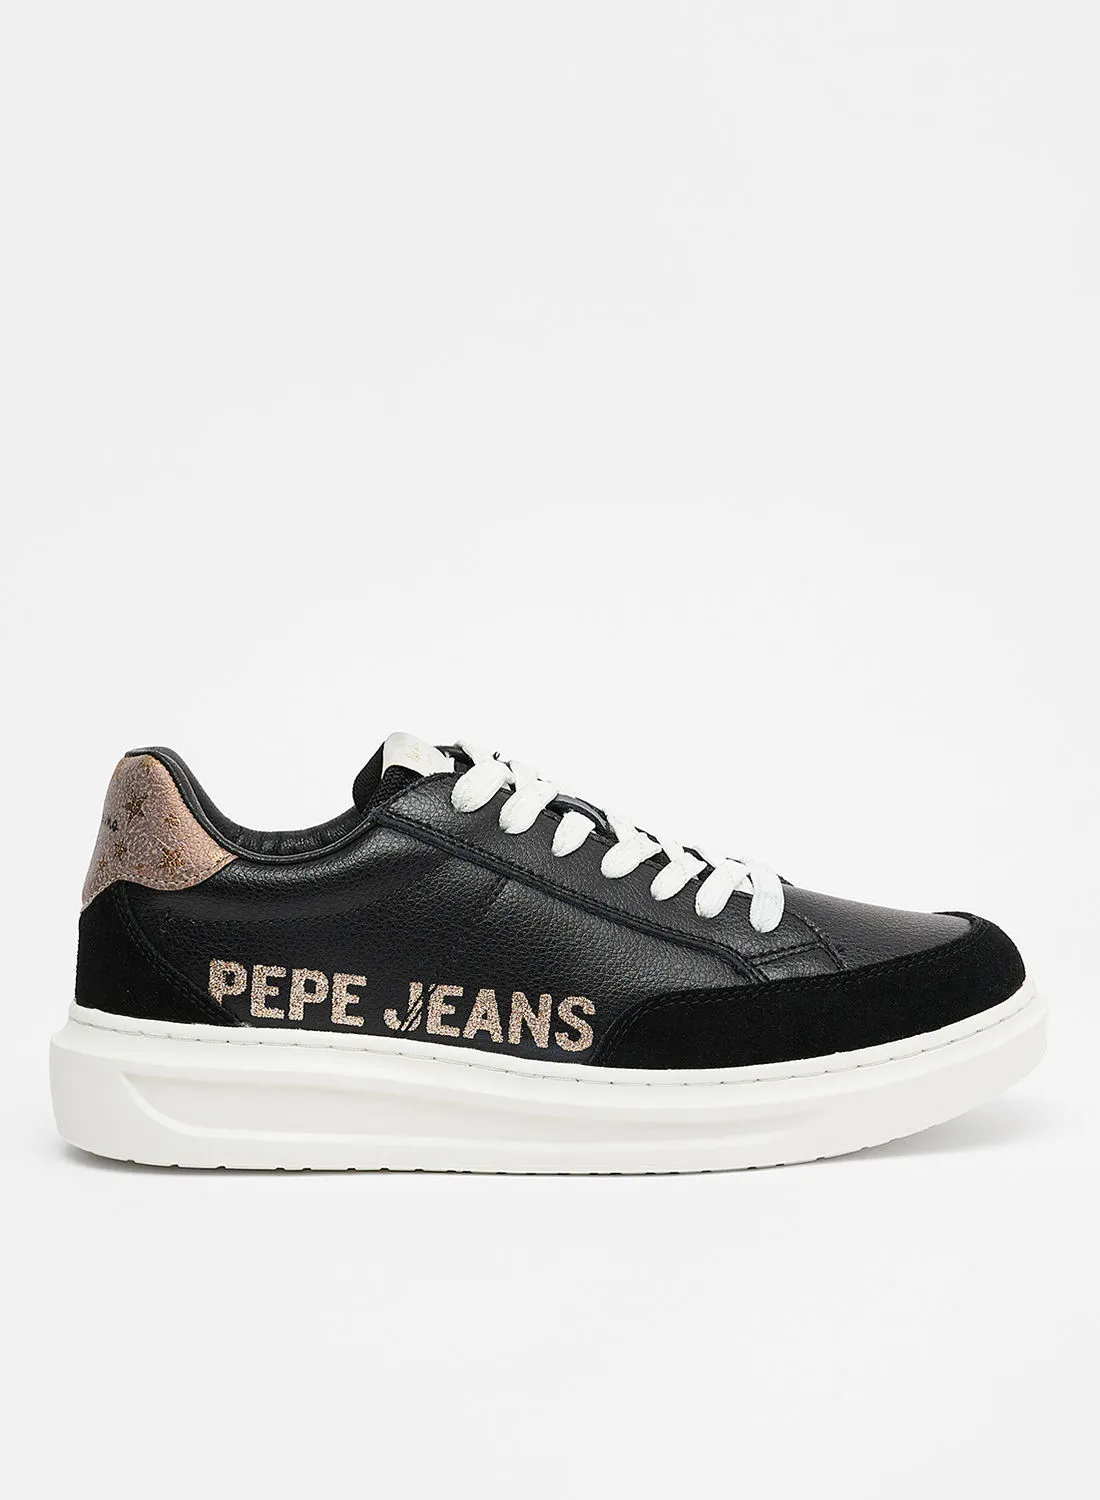 Pepe Jeans LONDON Abbey Willy Sneakers Black